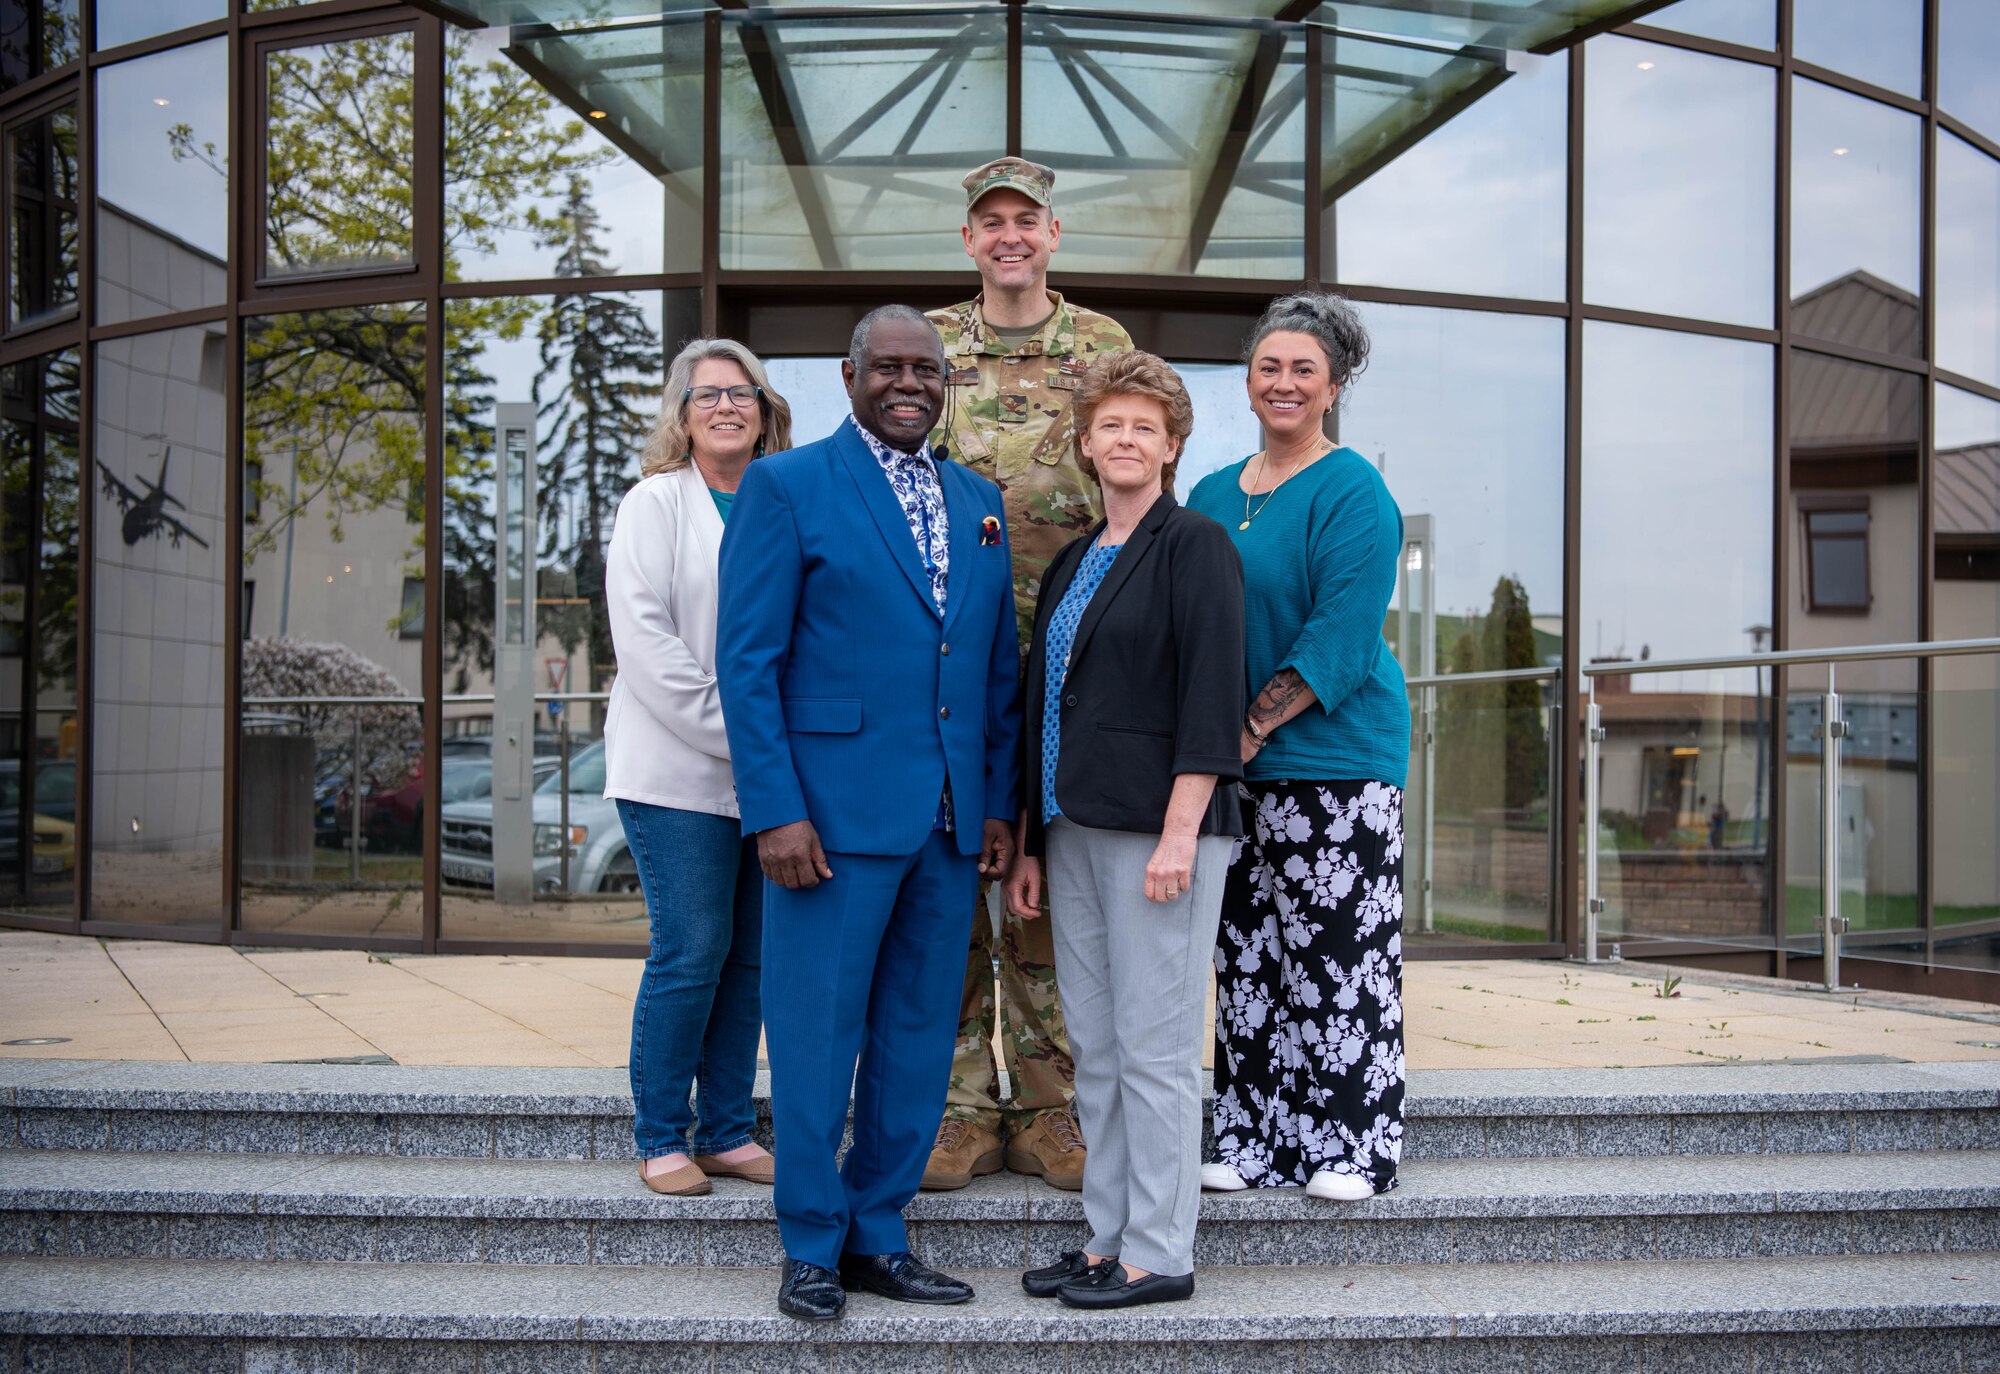 U.S. Air Force Col. Denny R. Davies, 86th Airlift Wing vice commander, poses for a group photo with team representatives of Ramstein Air Base Sexual Assault and Prevention Awareness, and U.S. Army Sexual Harassment/Assault Response and Prevention, and Russell Jordan, risk reduction program coordinator, on April 20, 2023 at Ramstein AB, Germany.